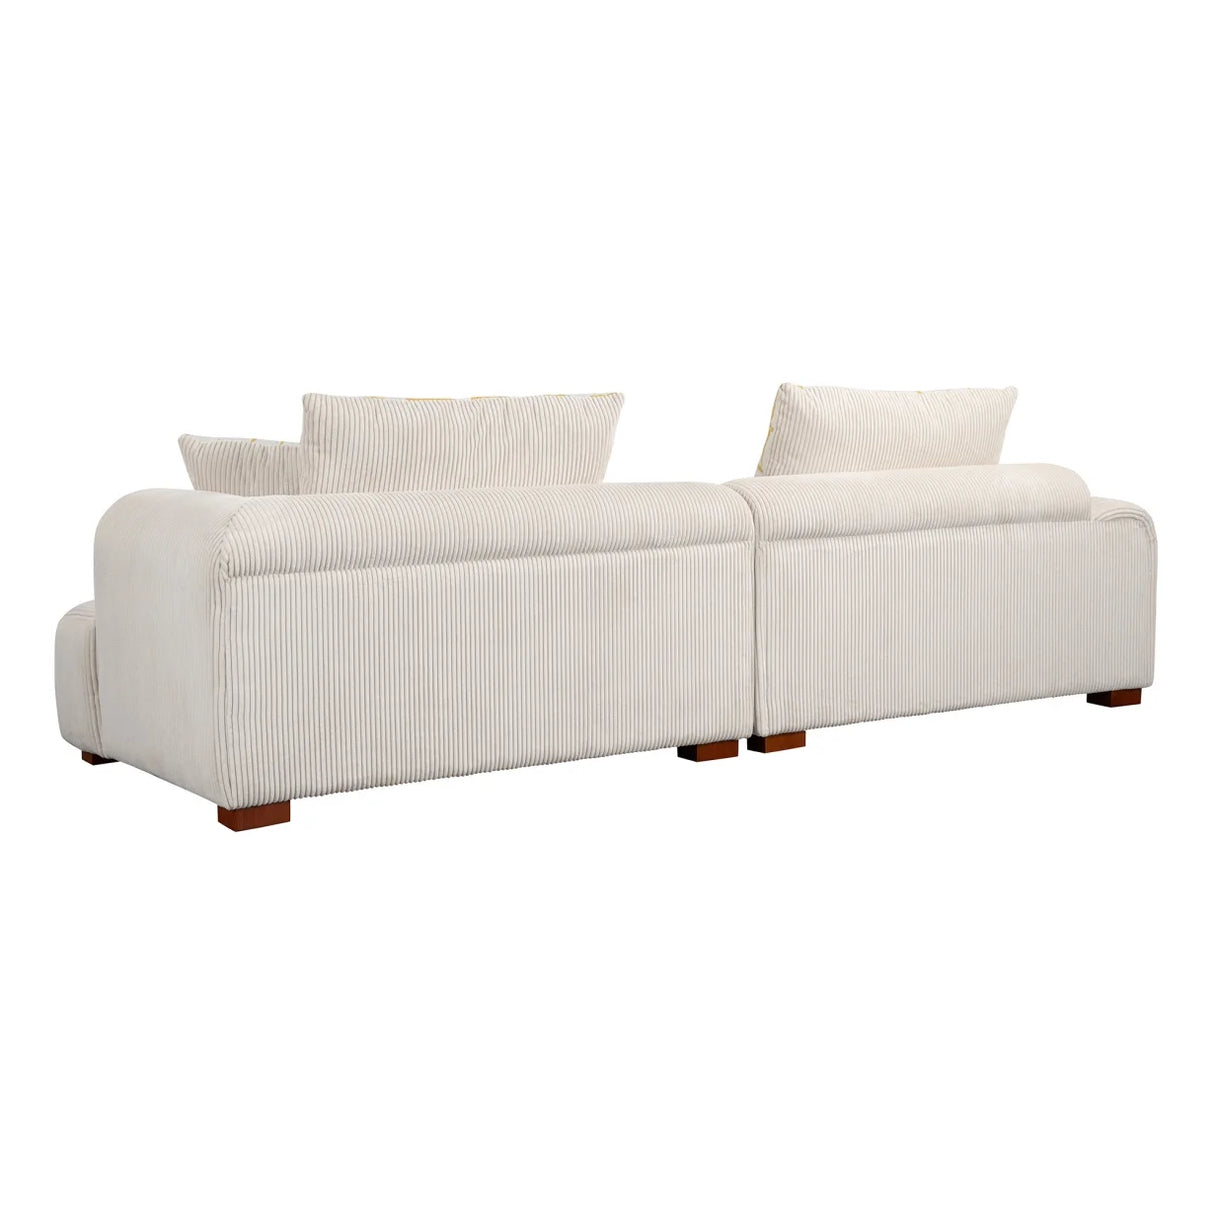 103.9" Sofa Couch, Modern Corduroy Upholstered Couch Tufted Casual Sofa with 4 Pillows and with Rubber Wood Legs, Big Comfy Couch Sofas for Living Room, Bedroom, Office, Beige